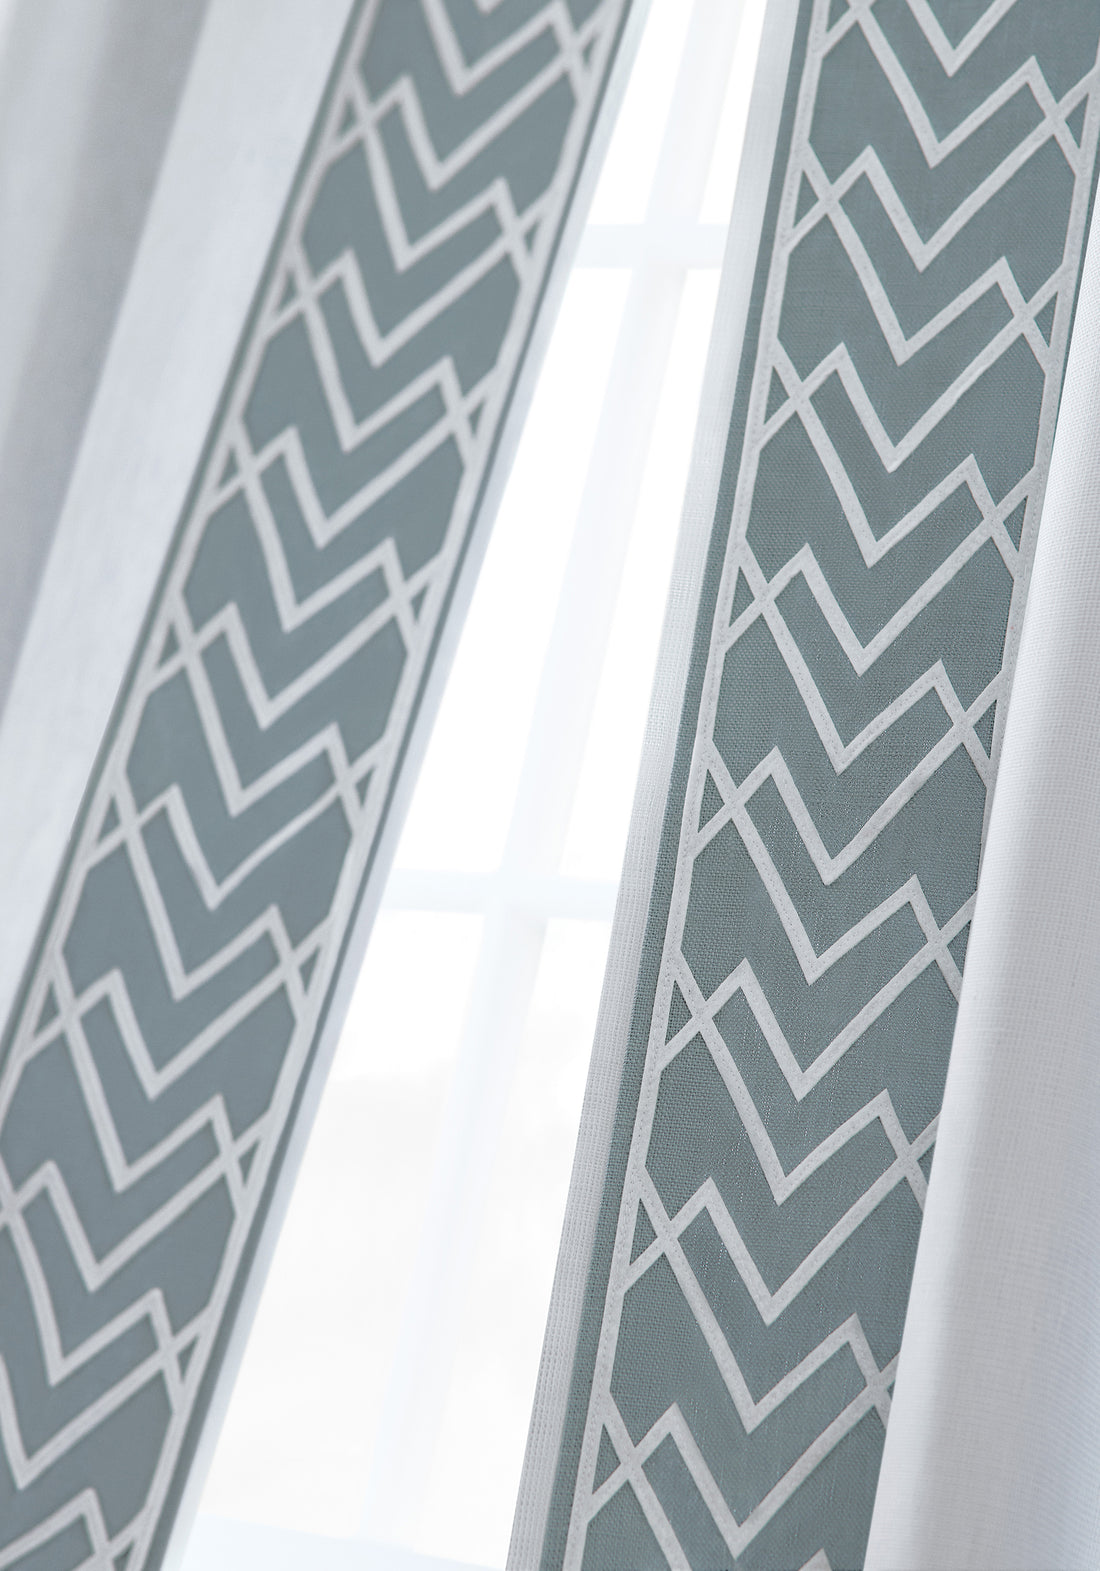 Skye Linen wide woven fabric drapes in mist color with Summit applique tape - pattern number FWW7618 - by Thibaut in the Palisades collection